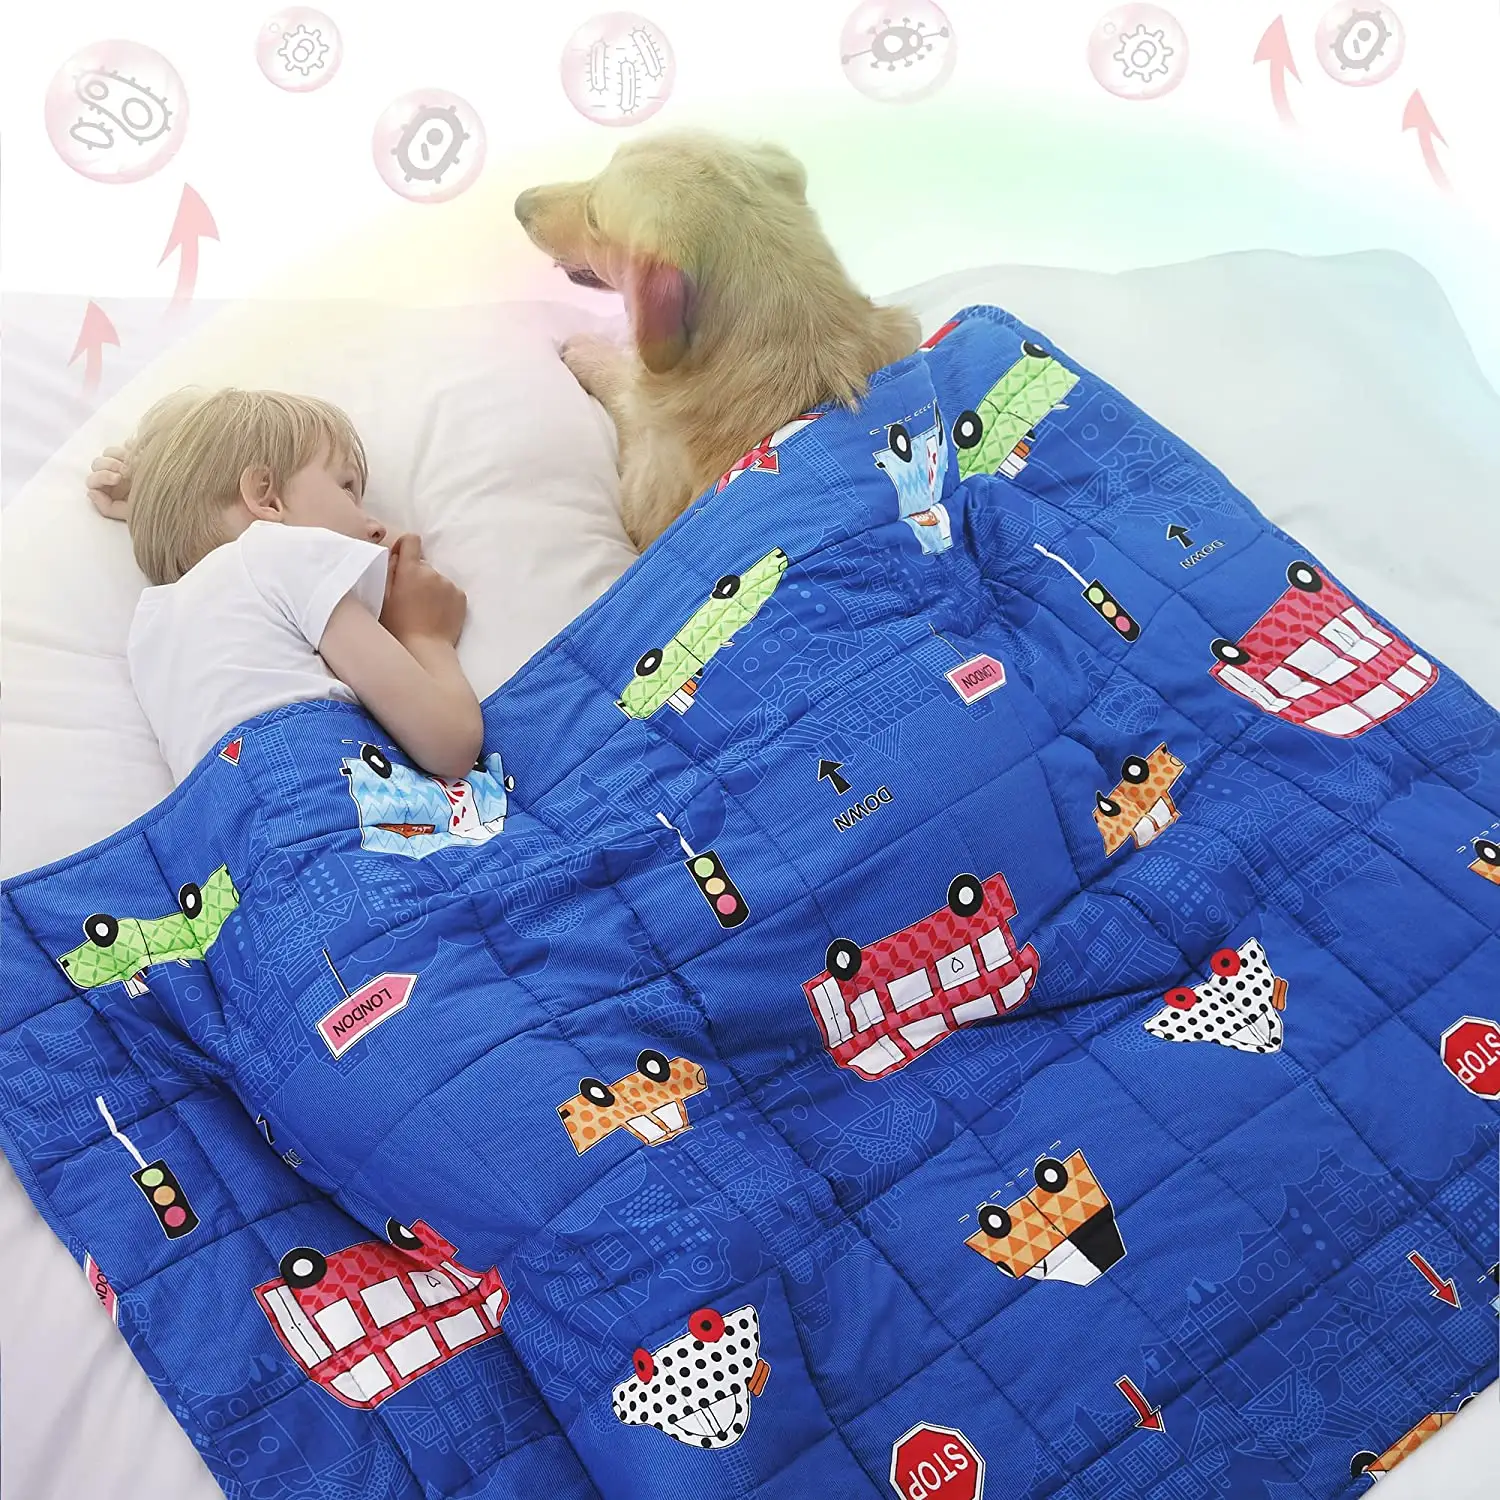 Customable Pattern Therapy Autism Cotton Cooling Adult Kids Luxury Heavy Weighted Blanket For All Season